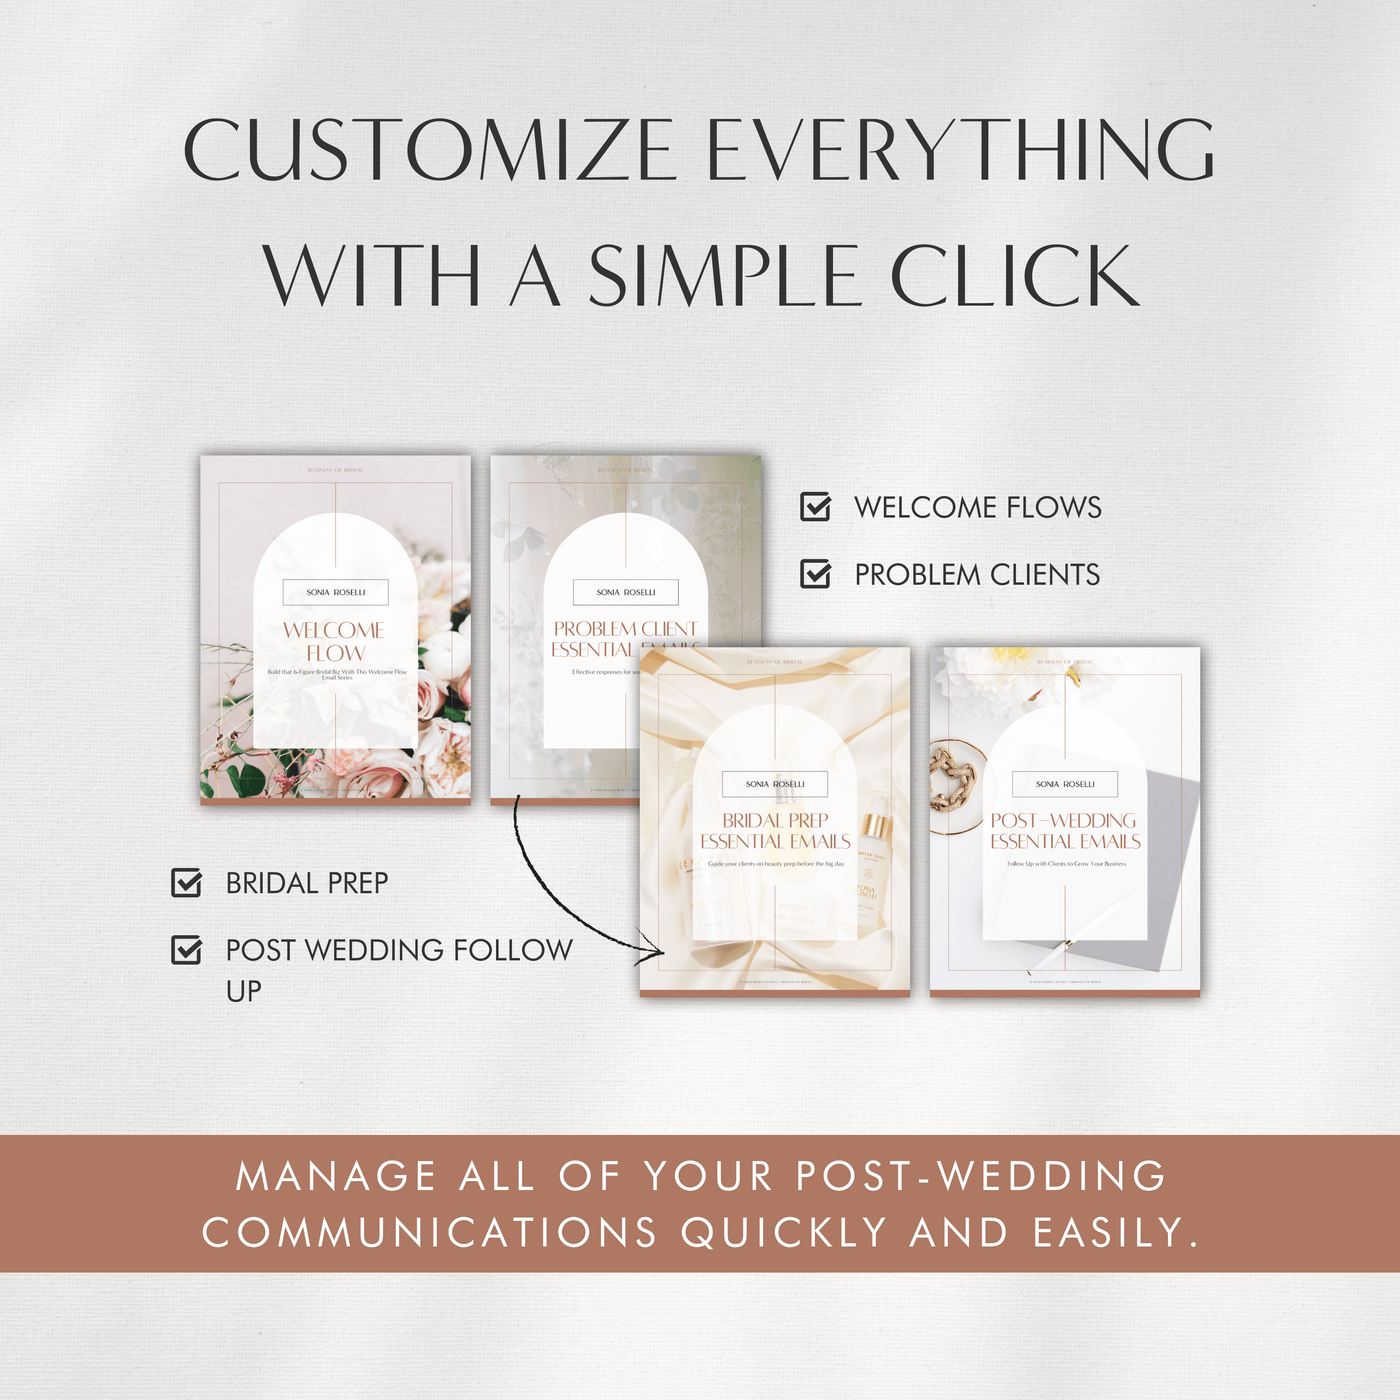 Customize everything, manage all of your post-wedding communications quickly and easily